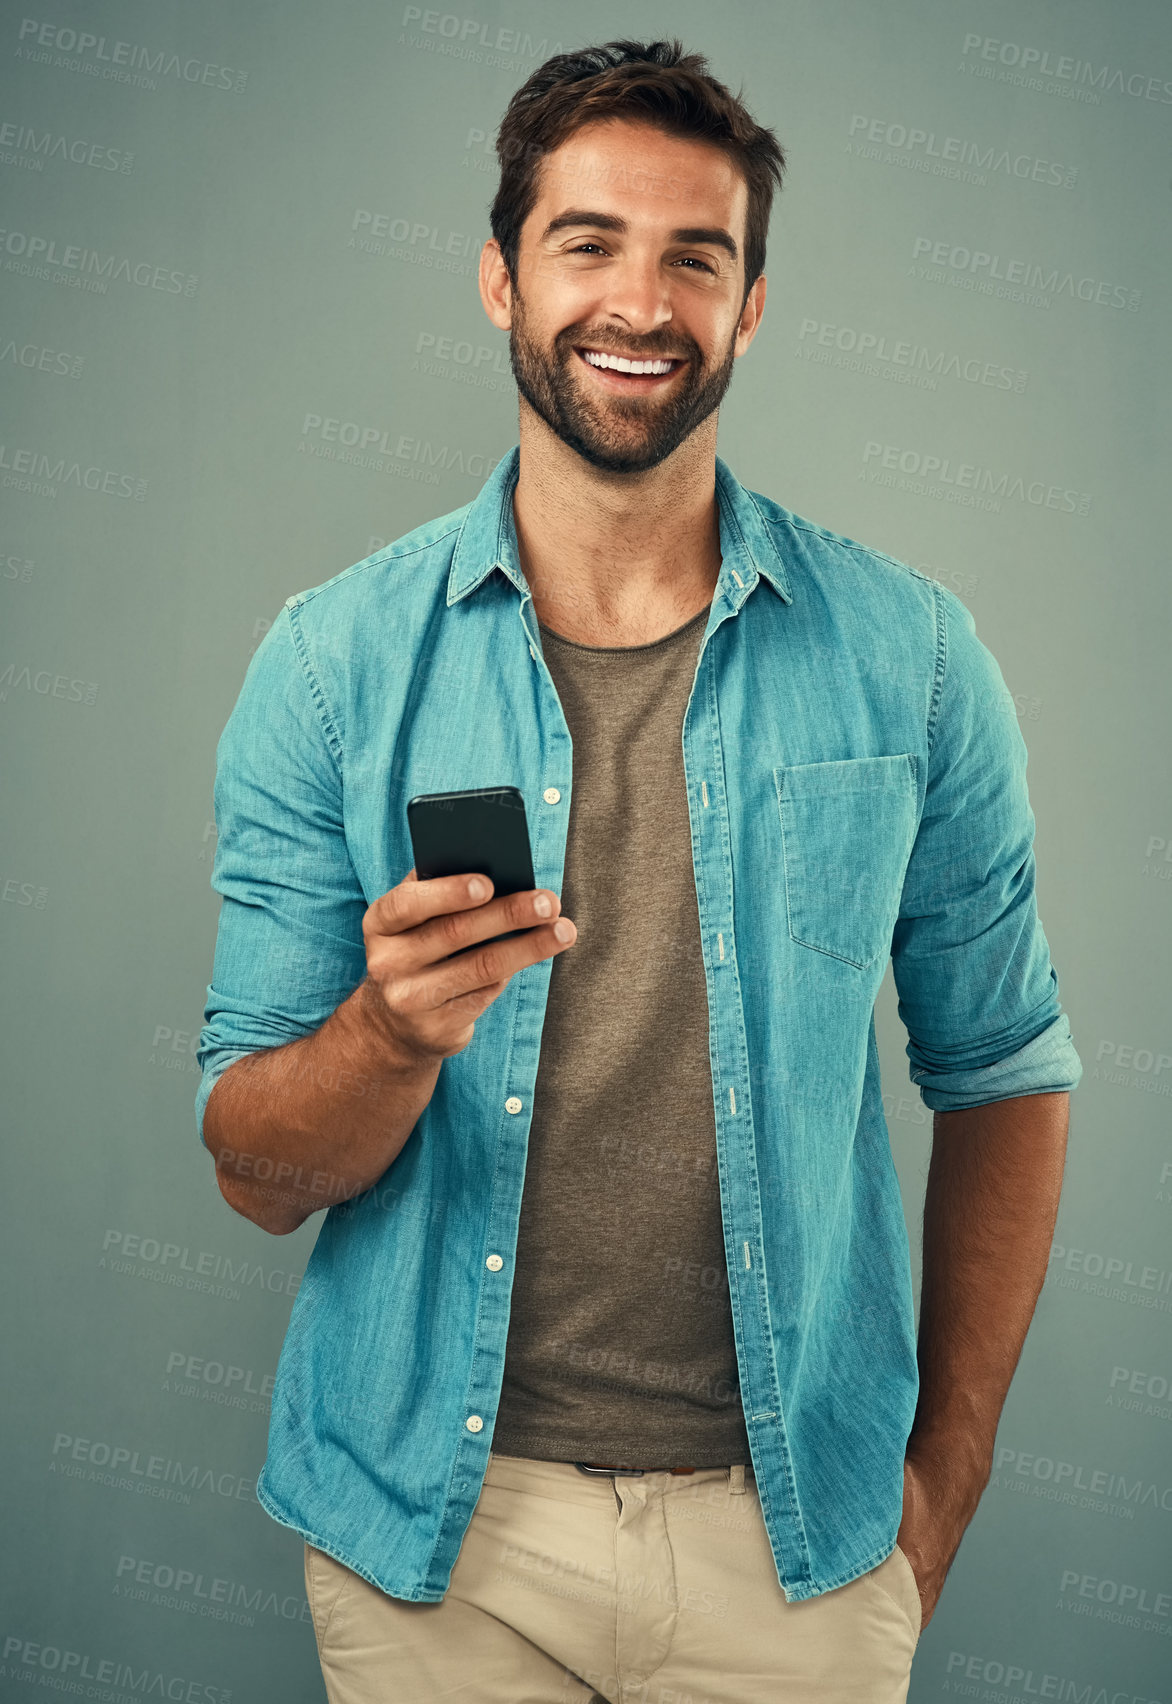 Buy stock photo Studio portrait of a handsome young man using a cellphone against a grey background